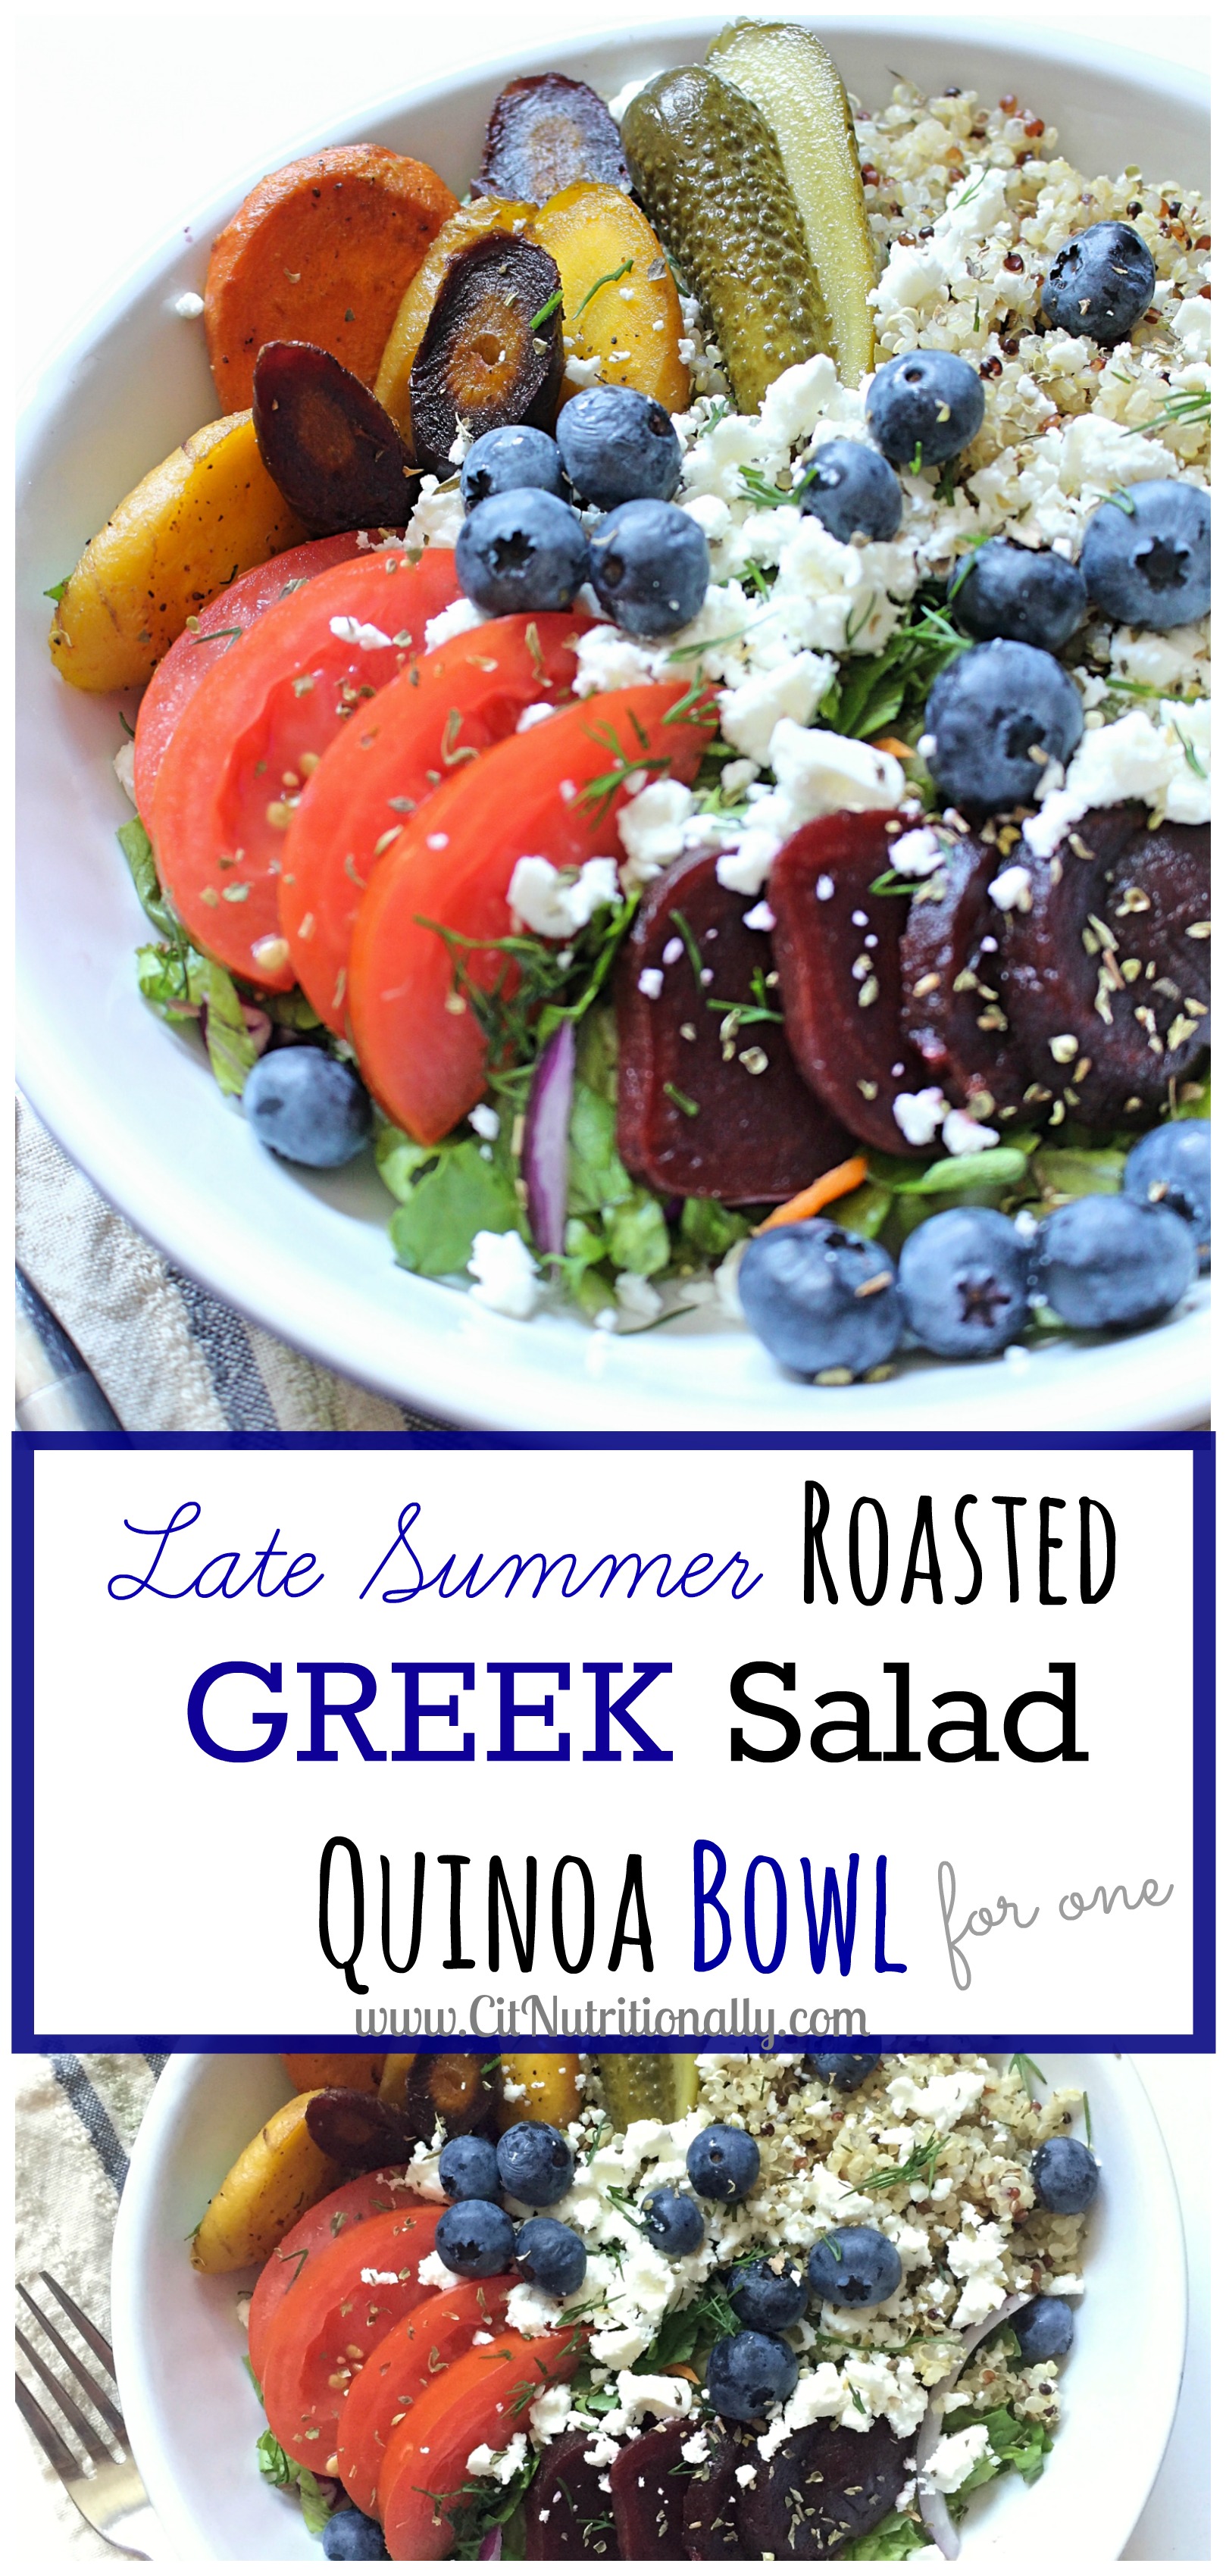 Late Summer Roasted Greek Salad Quinoa Bowl for One | C it Nutritionally